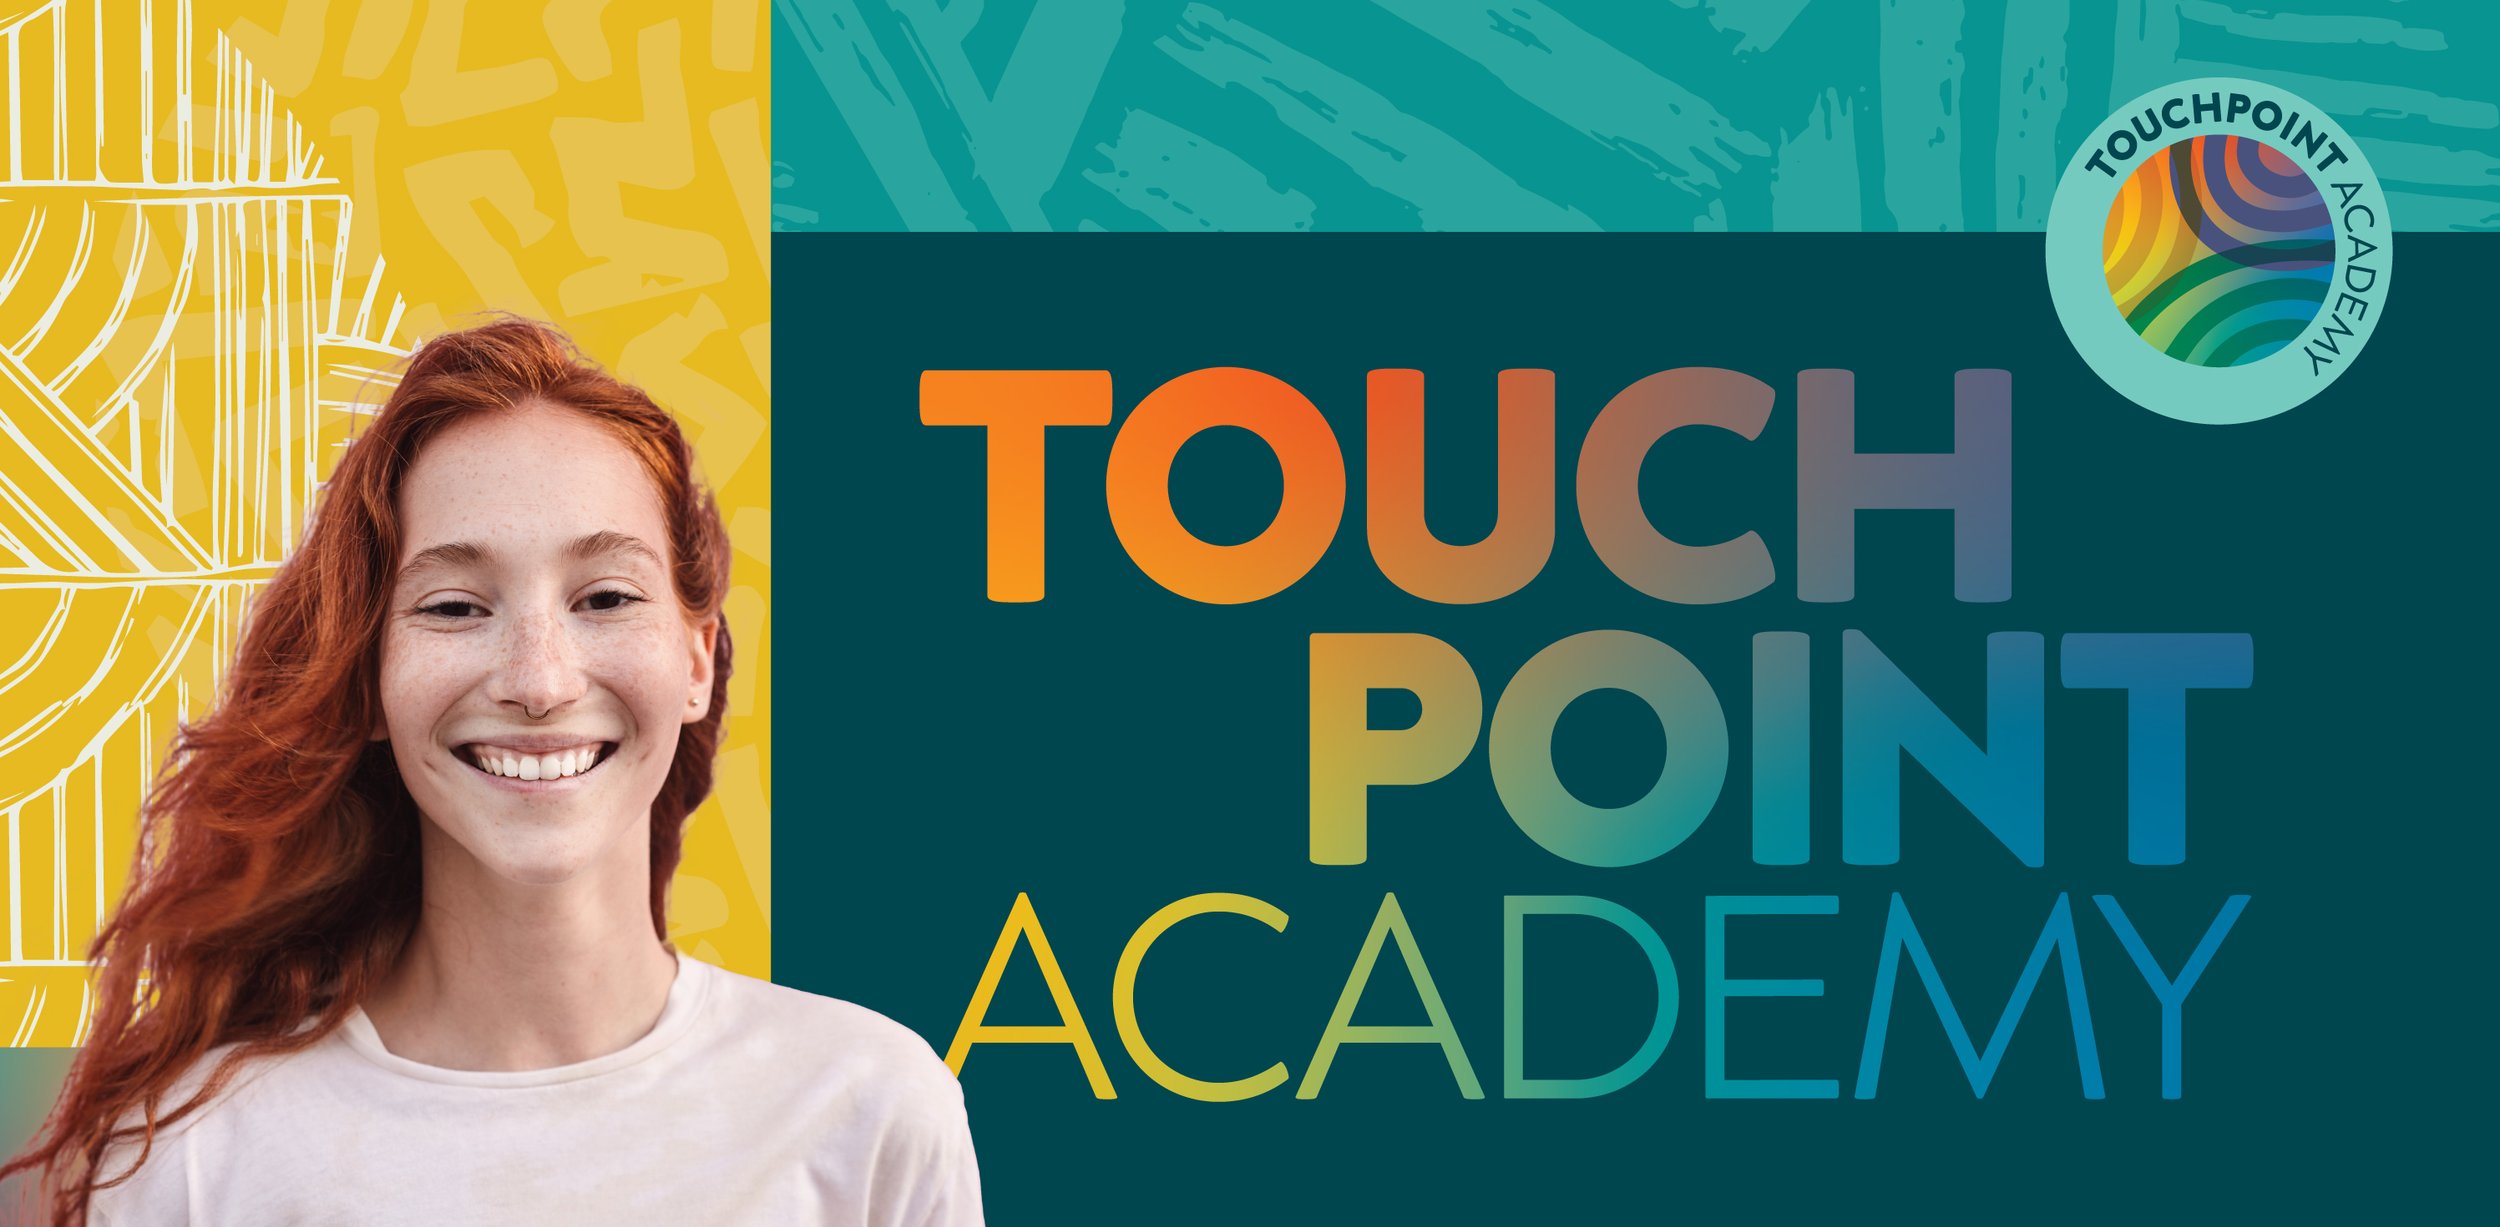 Touchpoint Academy